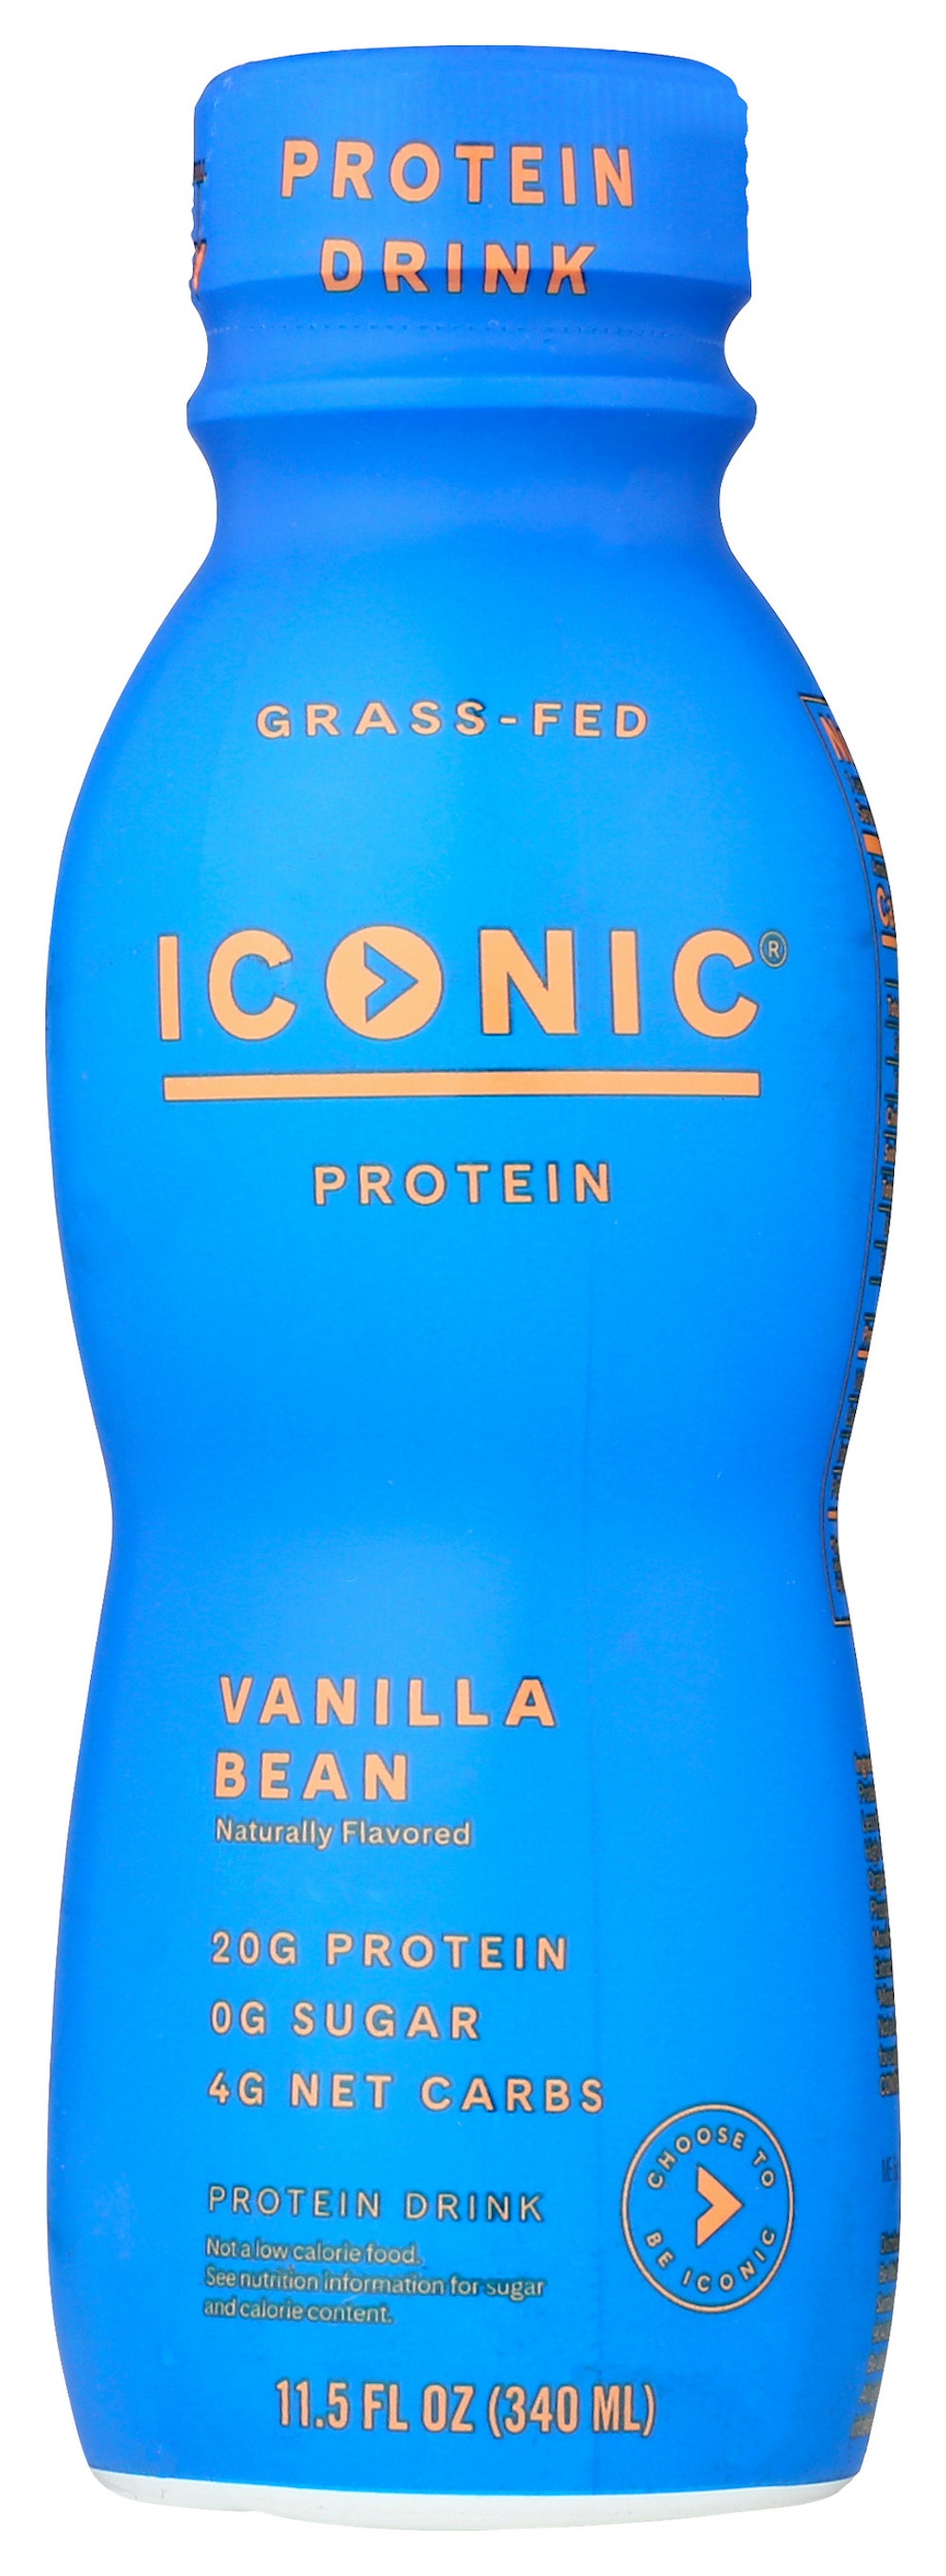 Iconic Protein Protein Drink, Chocolate Truffle, 11.5 Fl Oz, Pack